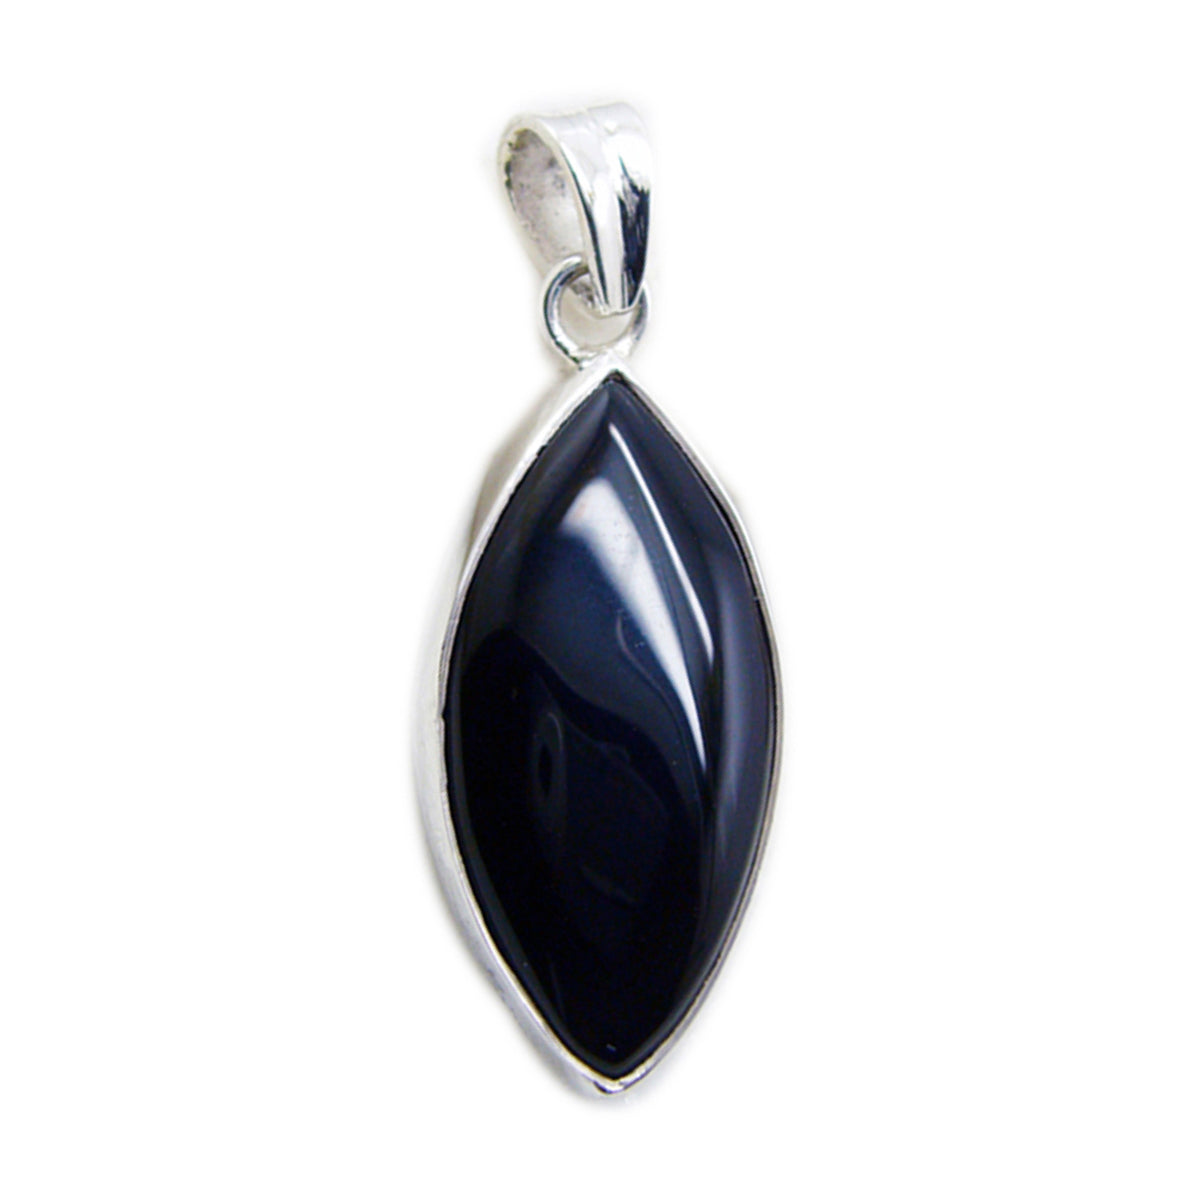 Riyo Knockout Gemstone Marquise Cabochon Black Black Onyx 1215 Sterling Silver Pendant Gift For Teachers Day